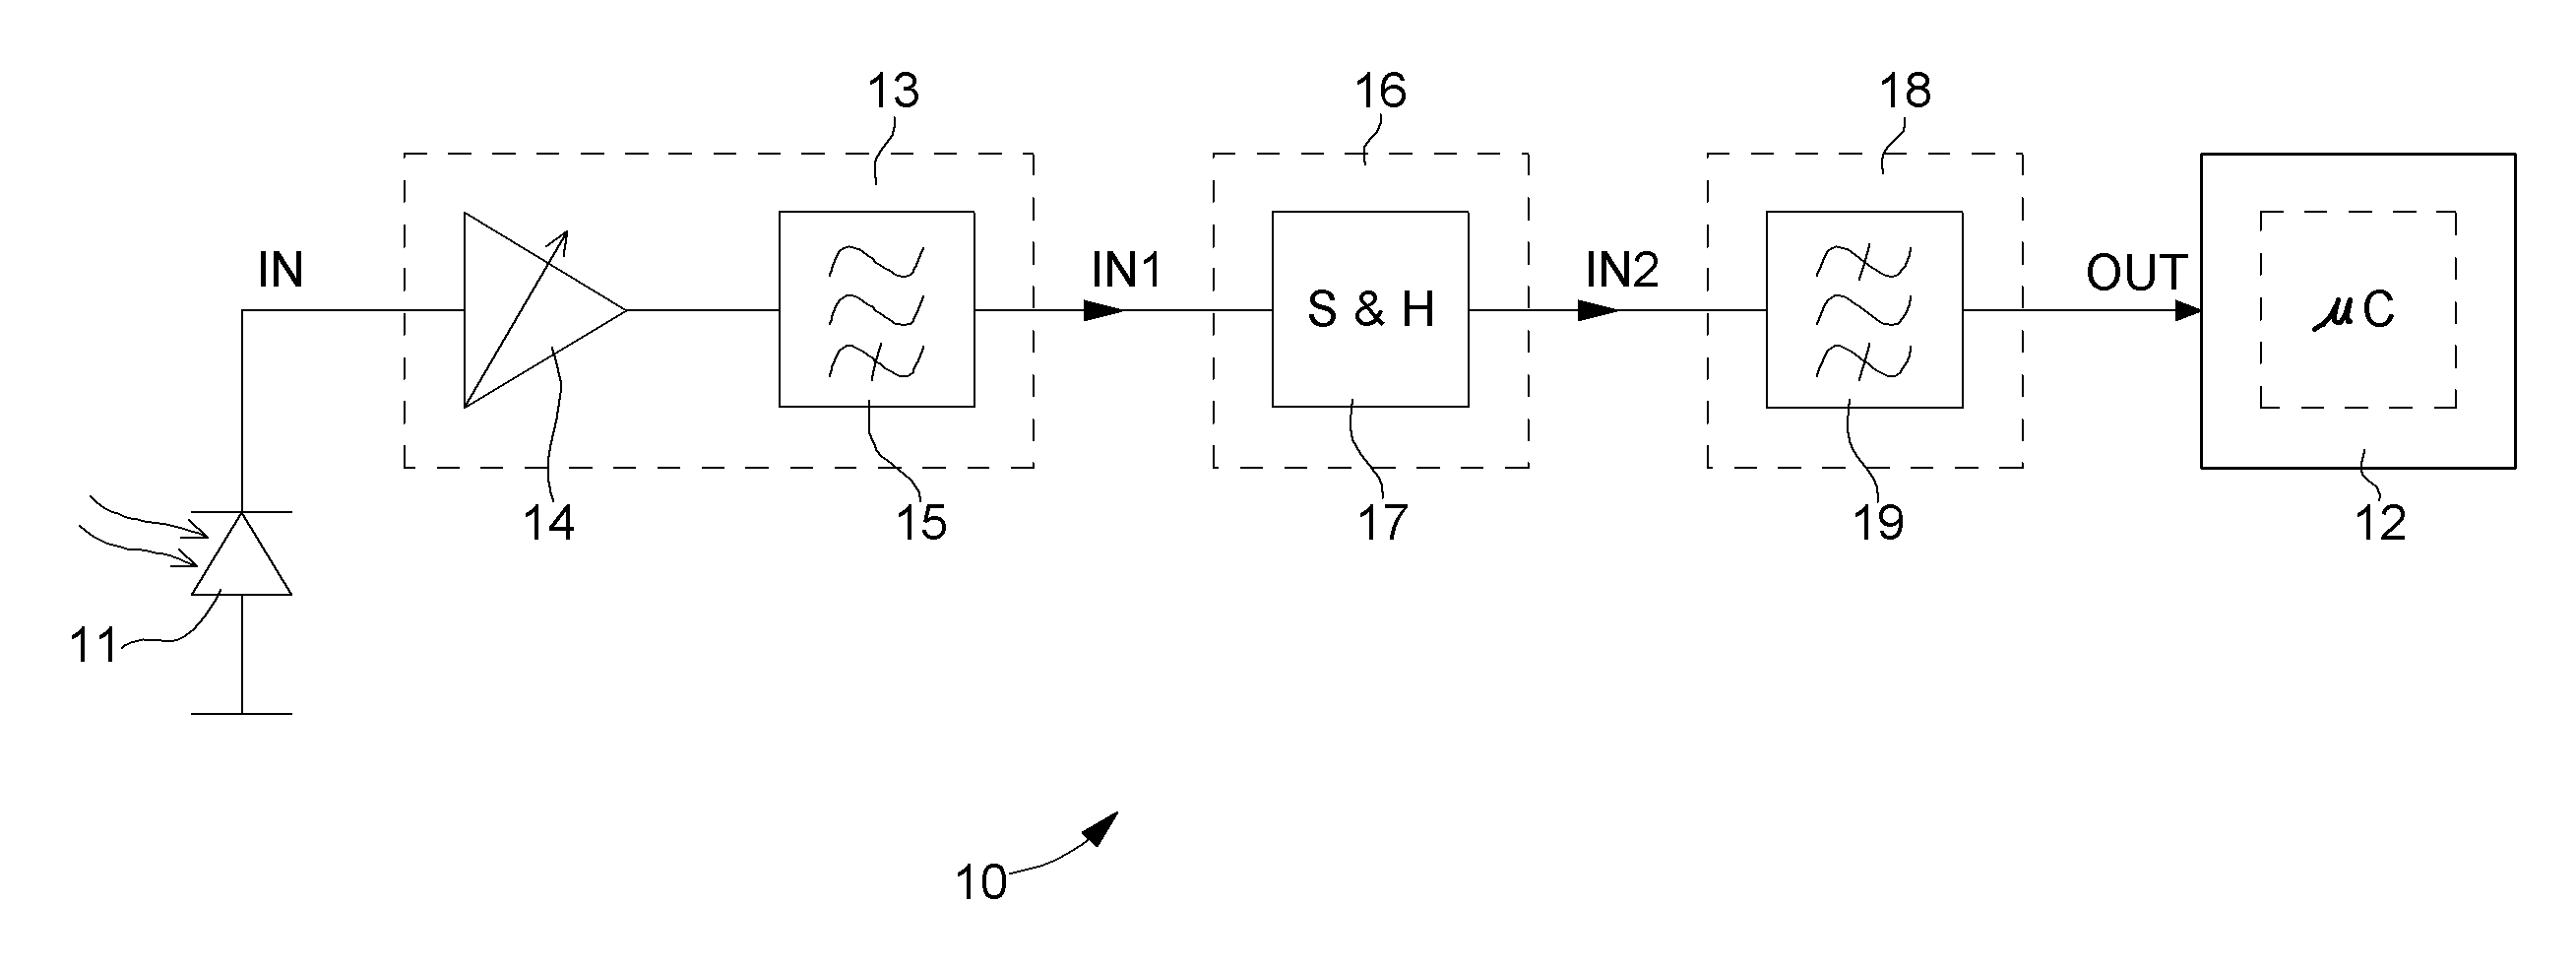 Signal conditioning circuit between an optical device and a processing unit